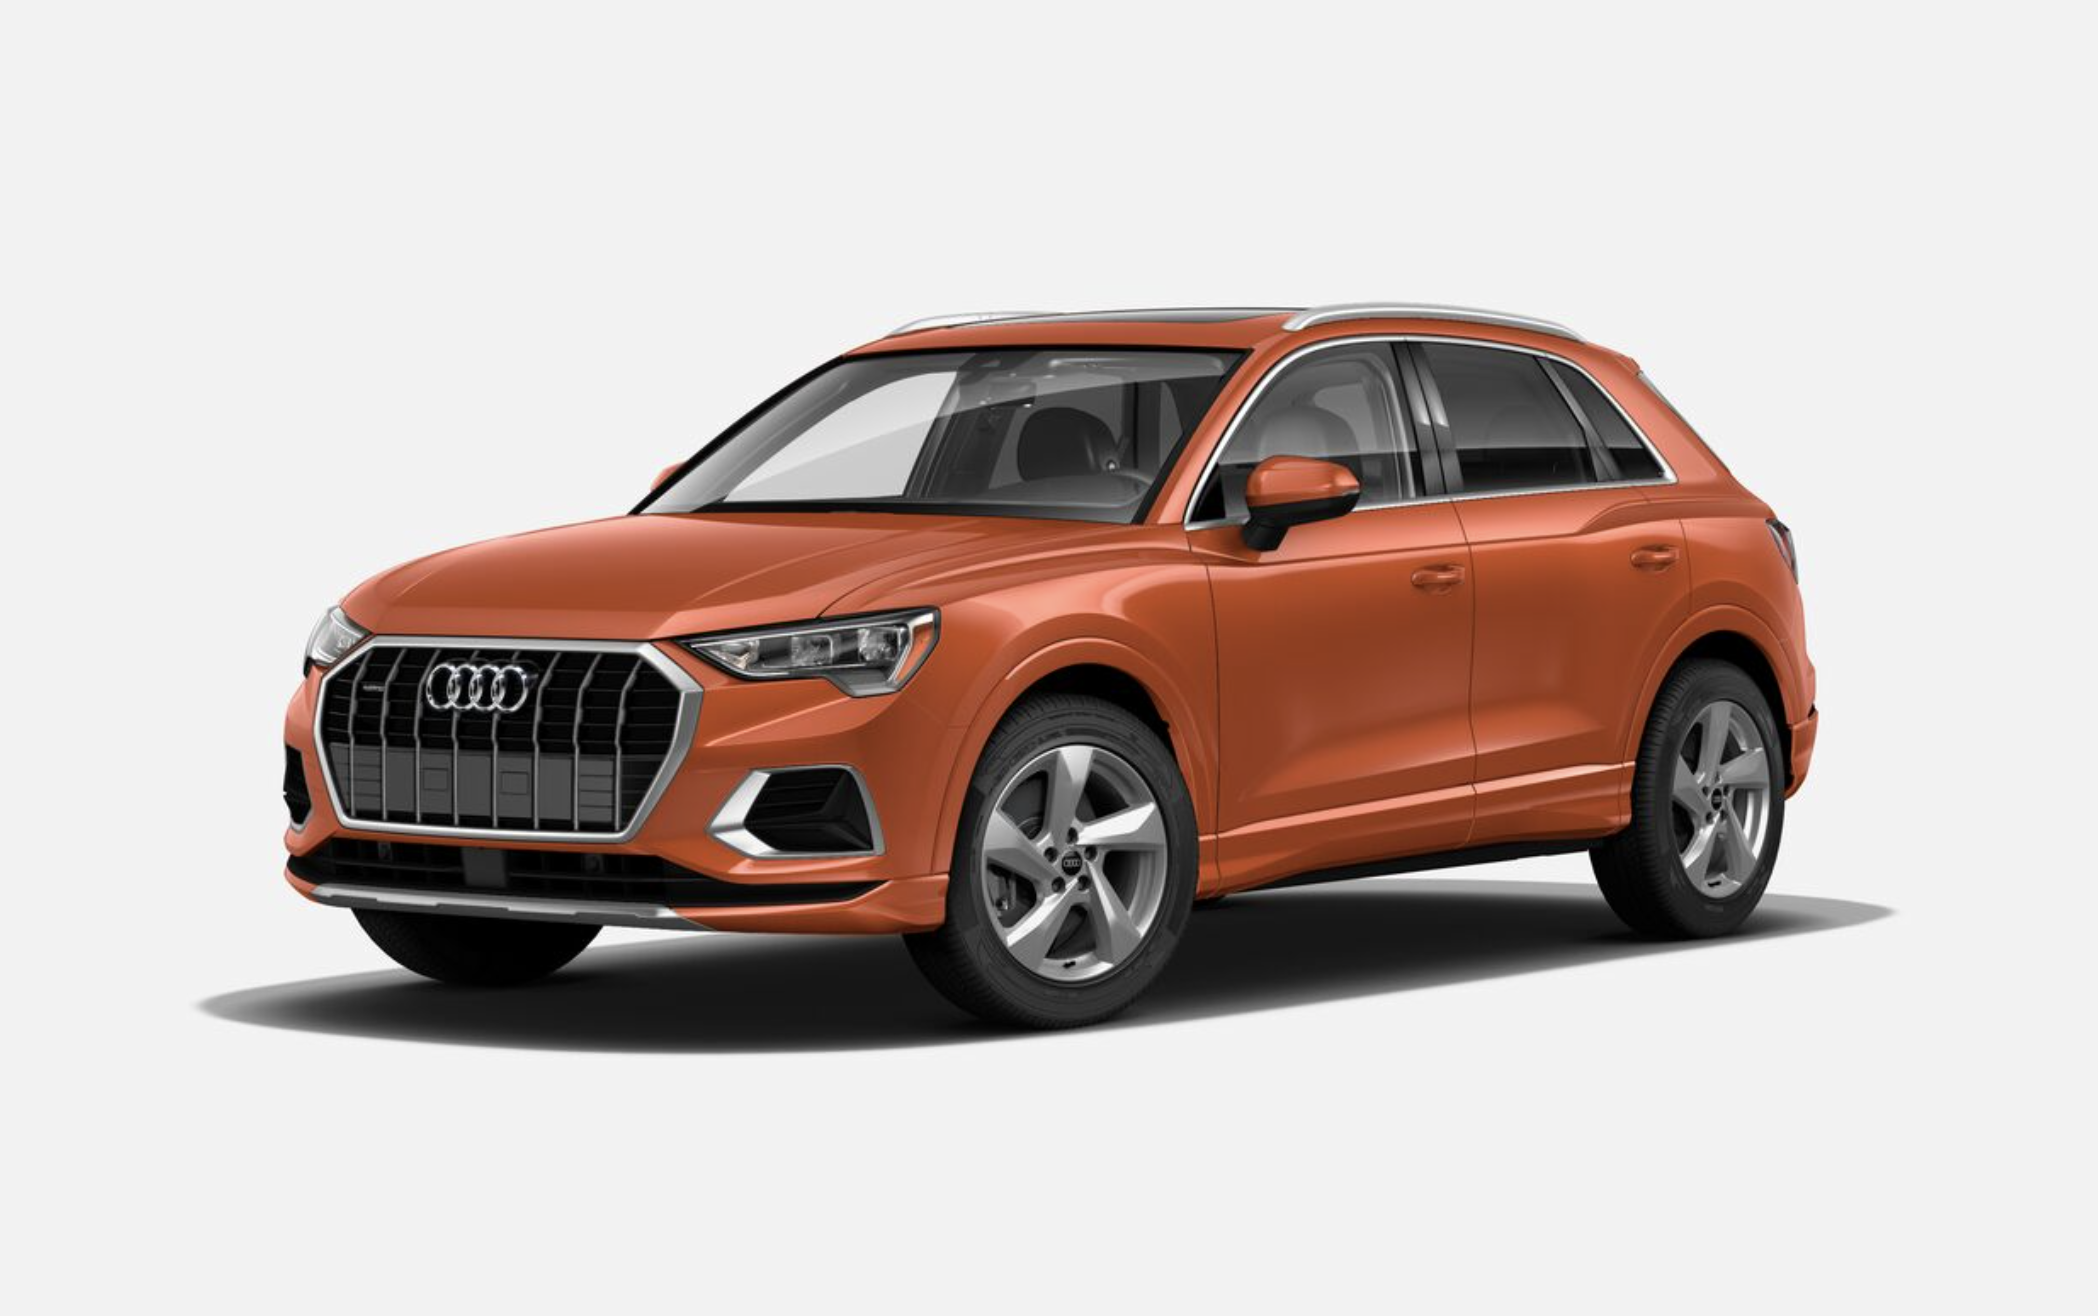 2021 Audi Q3 Gets Price Cut with New Base Model